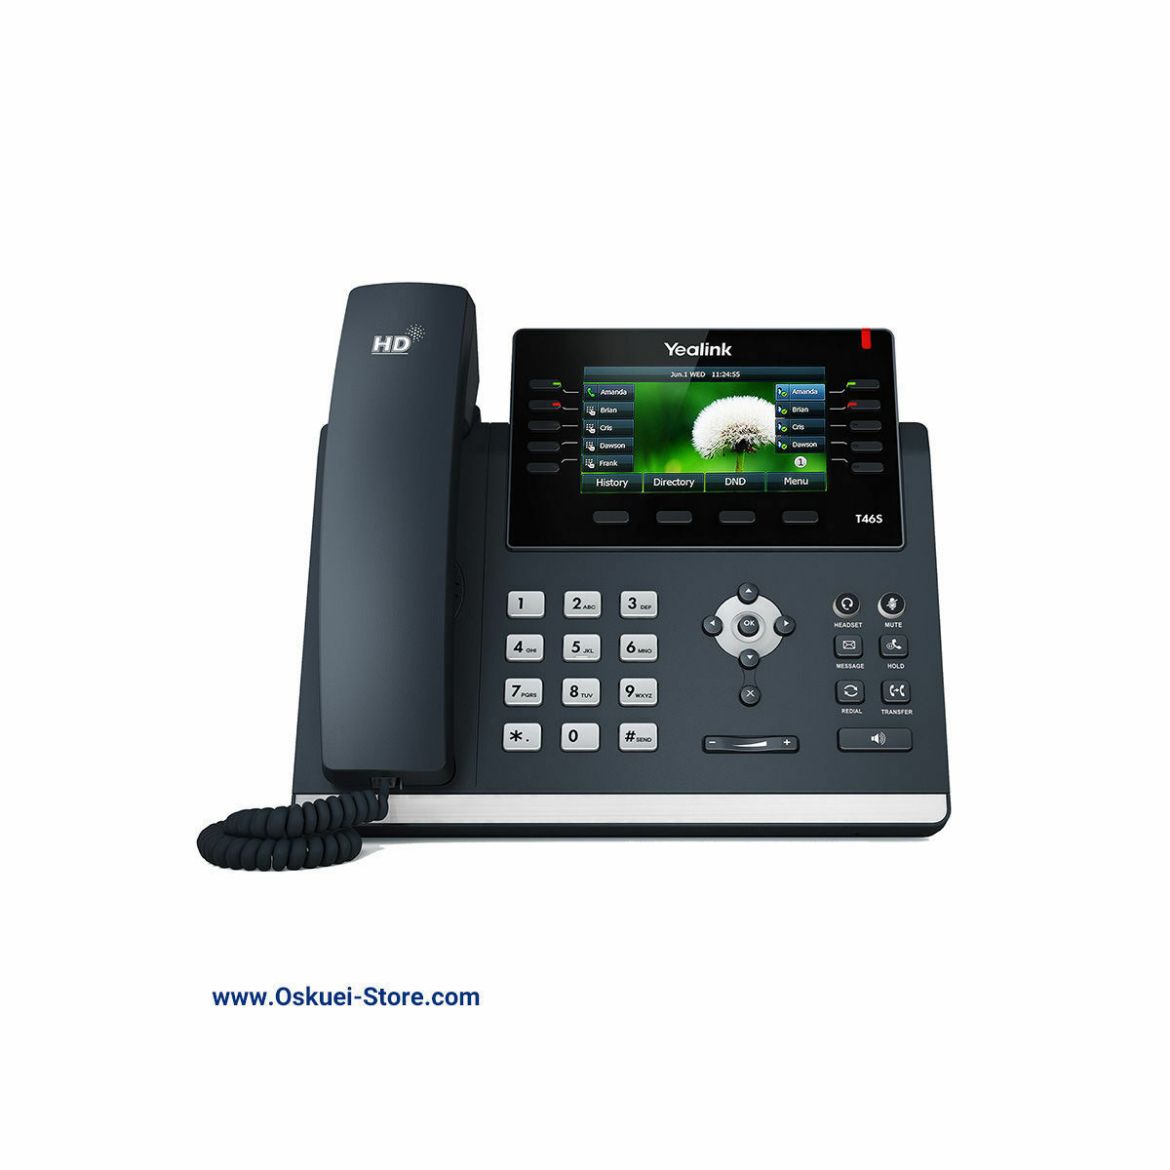 Yealink T46S VoIP SIP Telephone Black Front